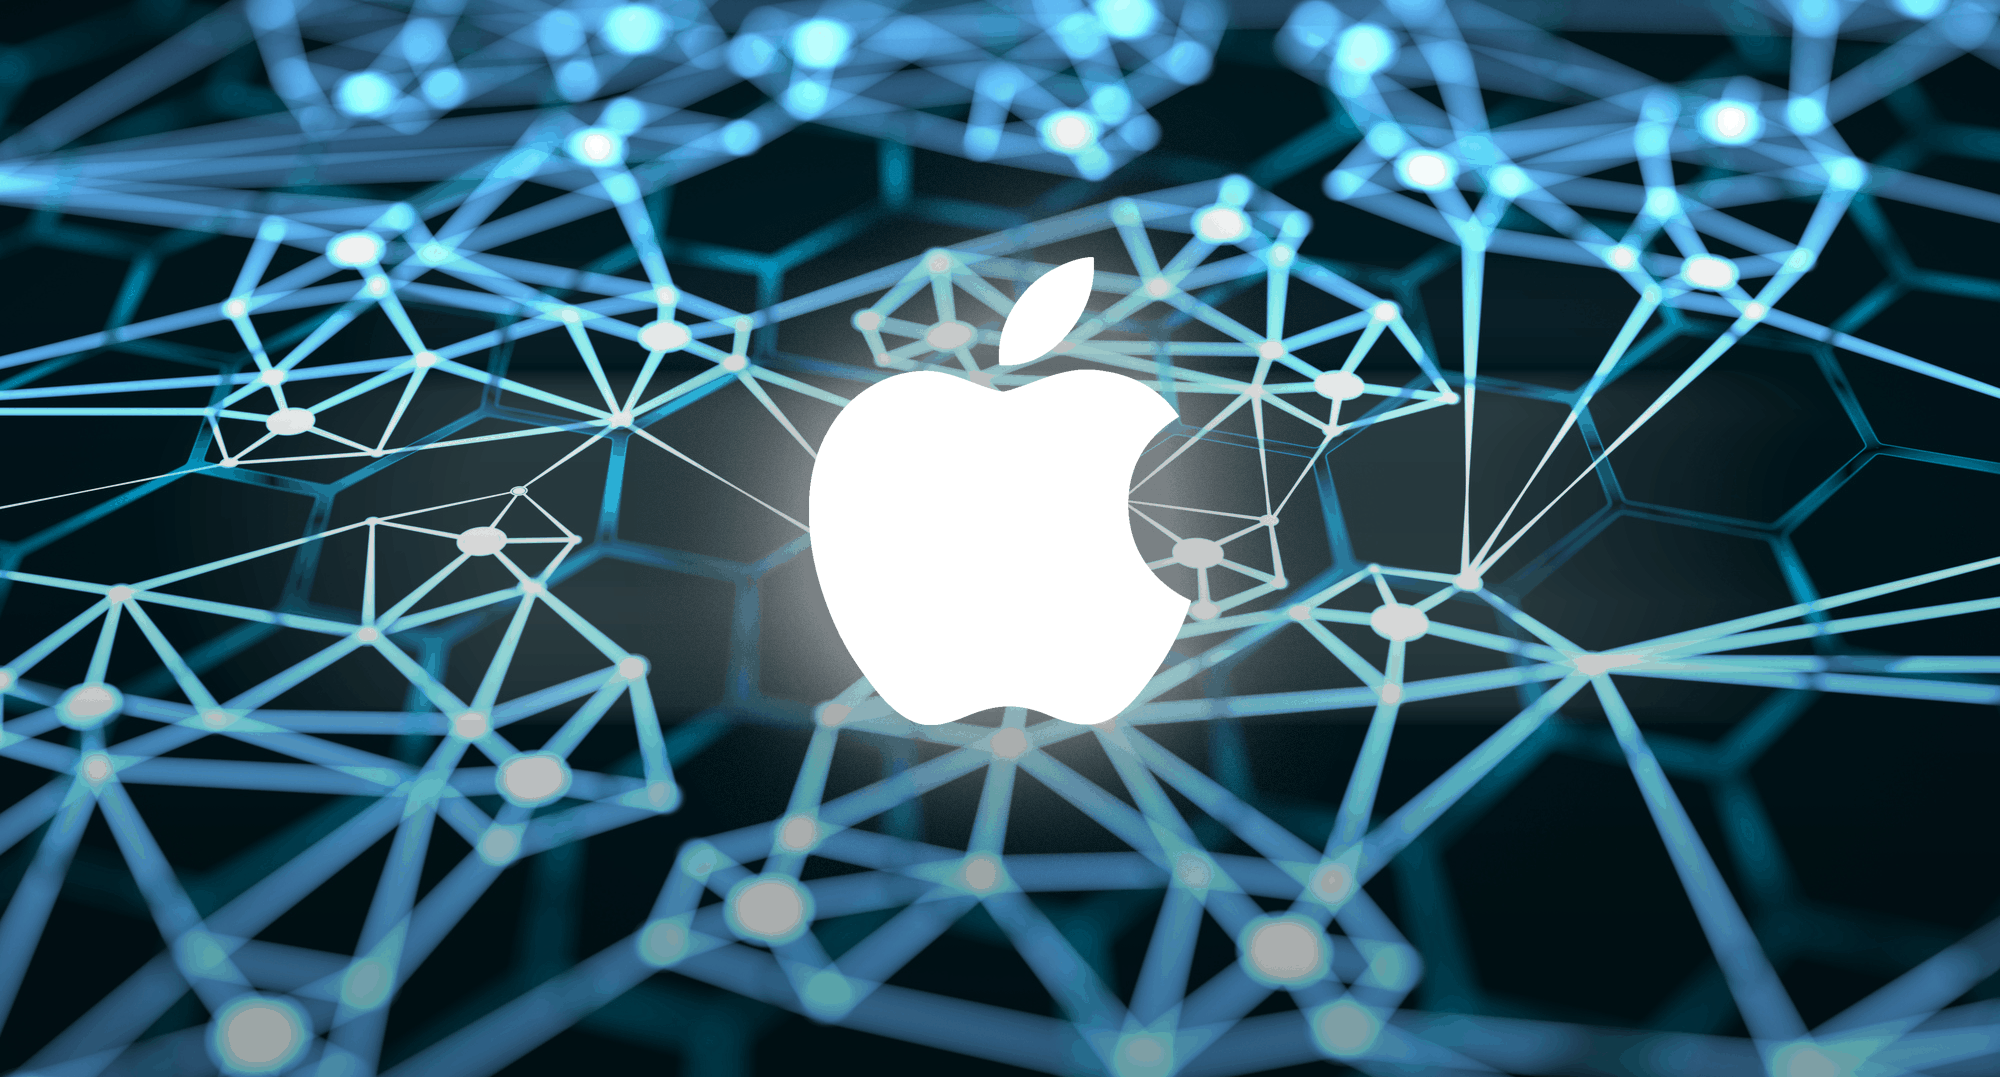 Apple acquired French AI startup Datakalab, specializing in on-device AI